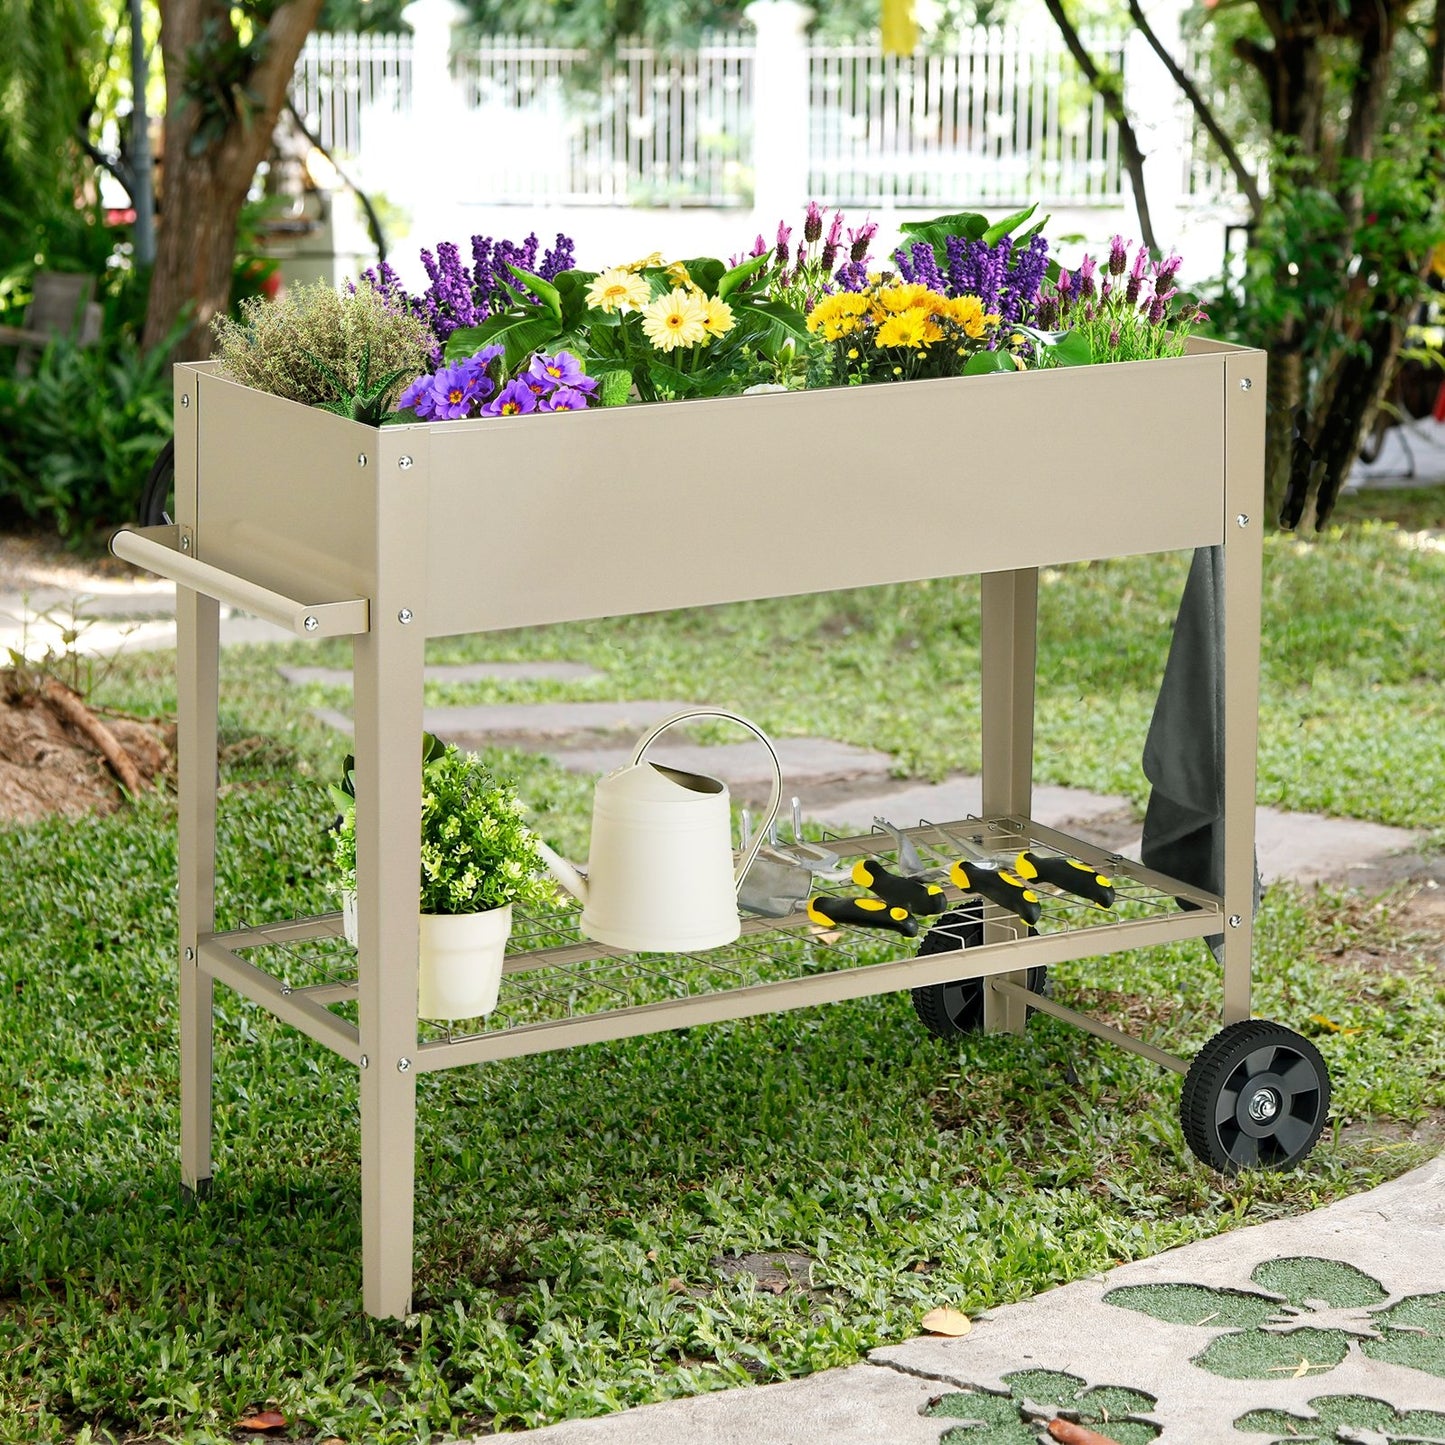 Metal Raised Garden Bed with Storage Shelf Hanging Hooks and Wheels, Light Brown